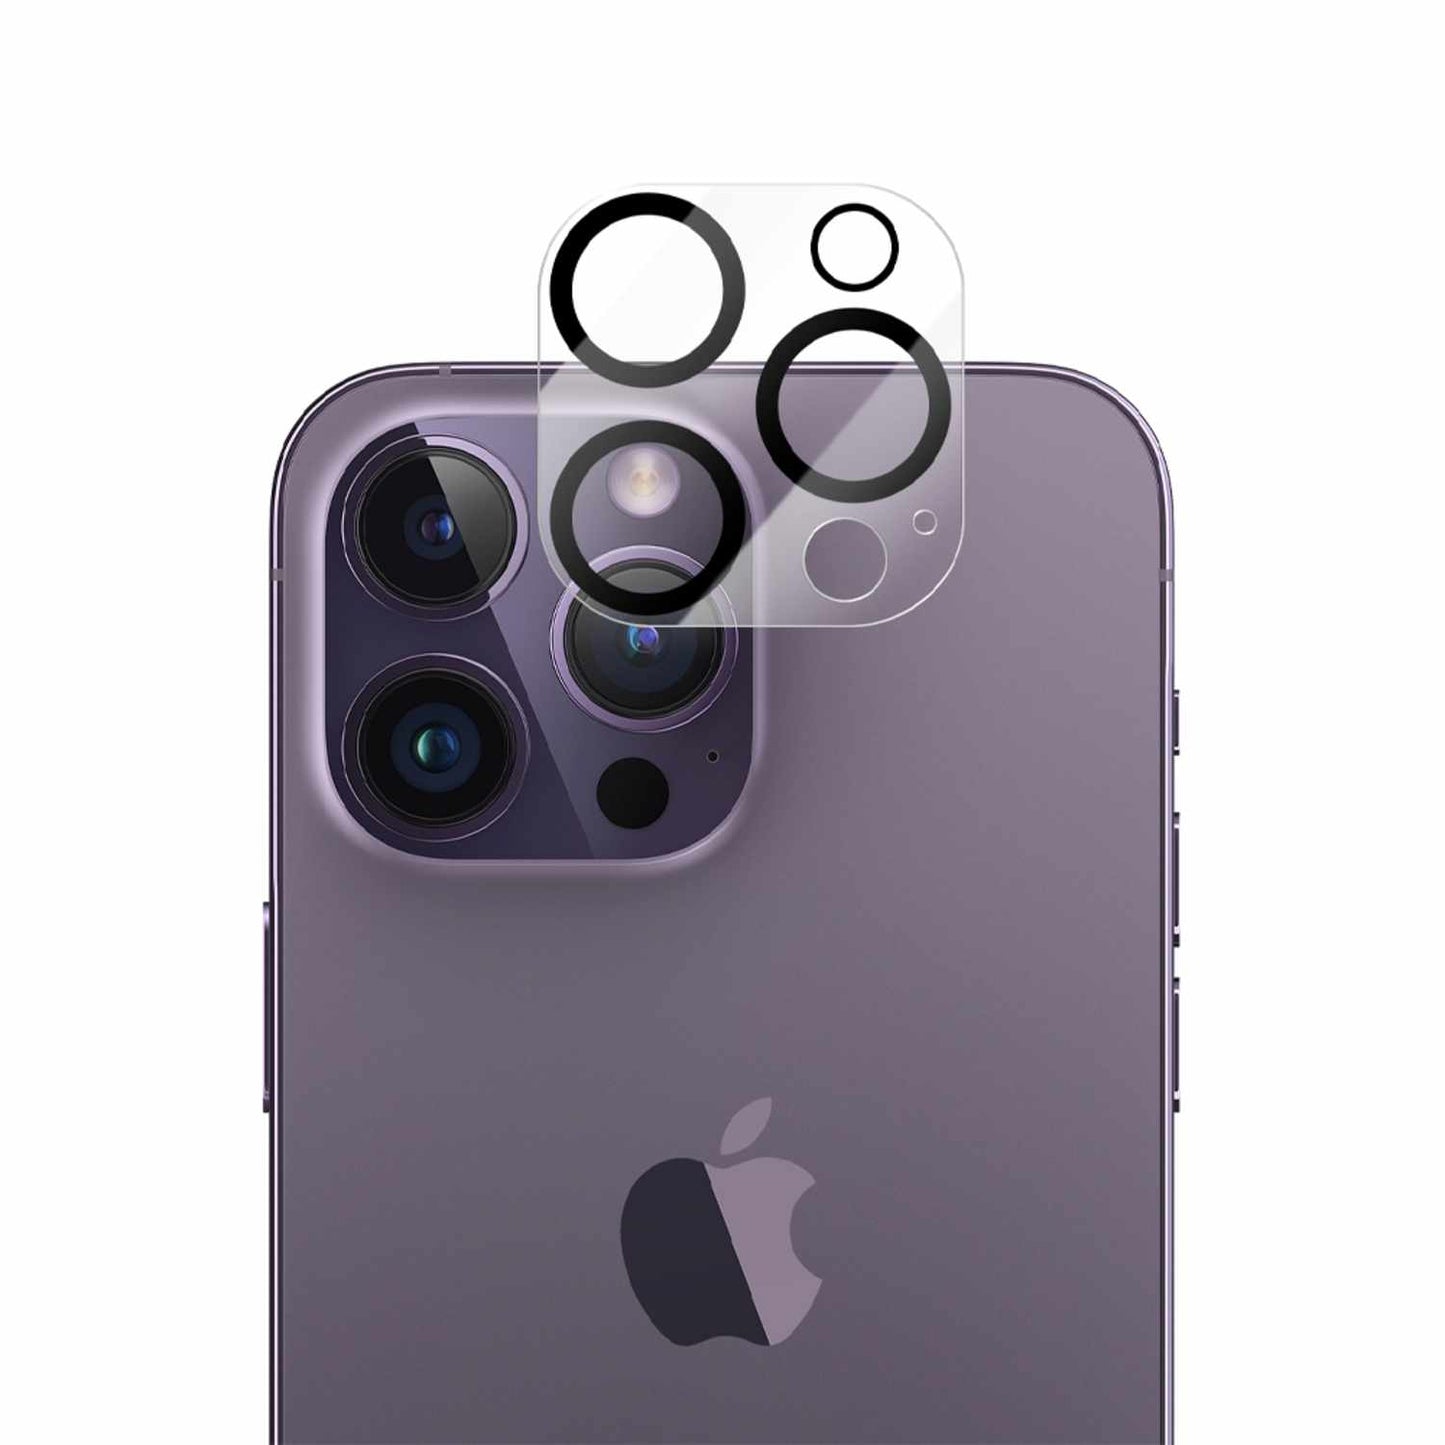 Camera Lens Protector for iPhone 13 Pro Max/13 Pro